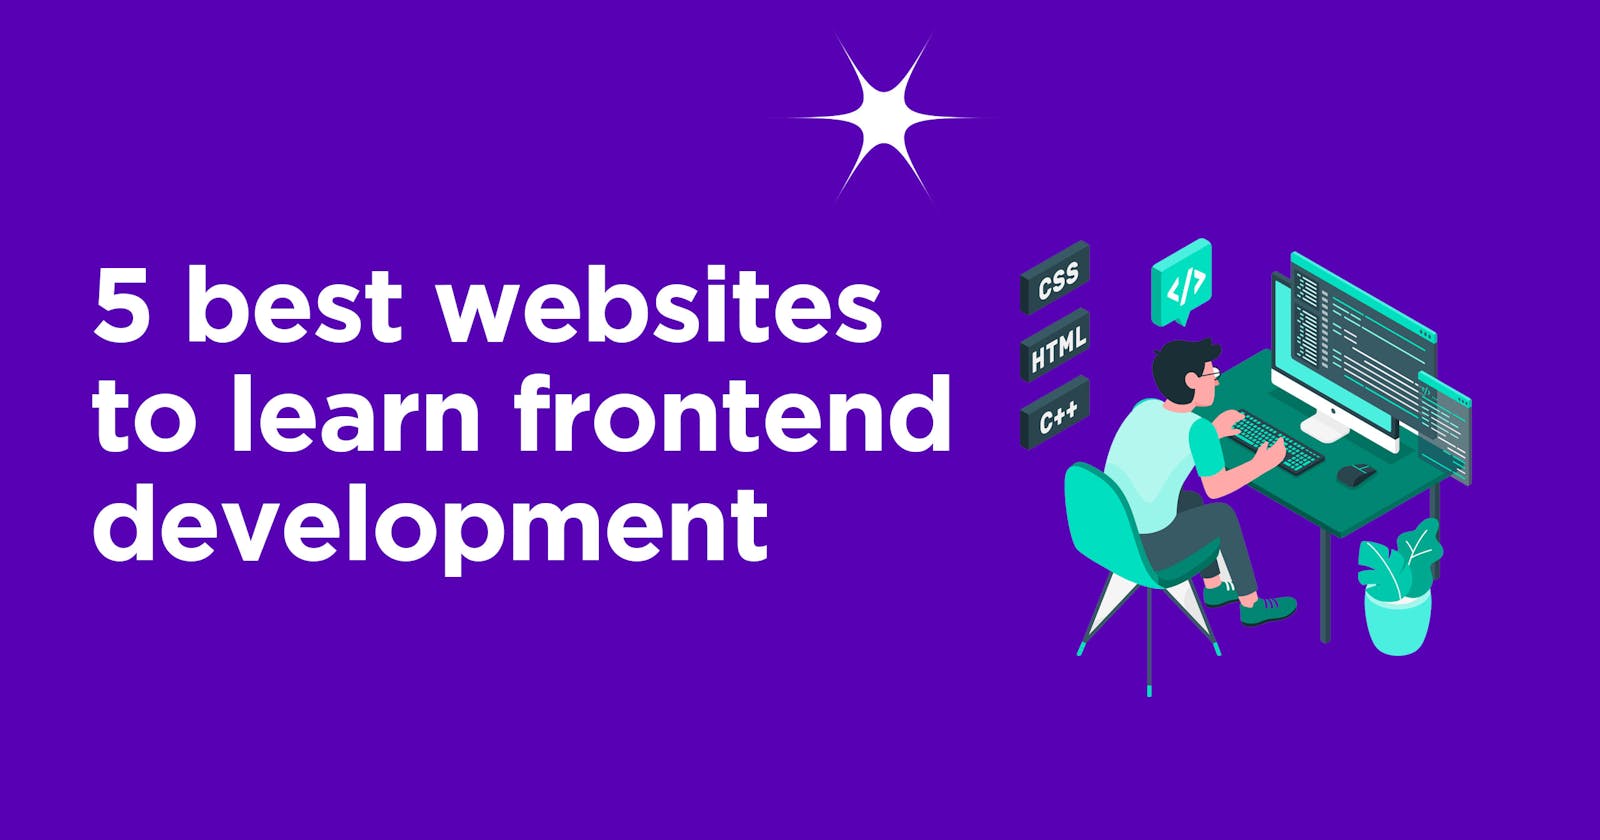 5 Top Websites for Learning Frontend Development